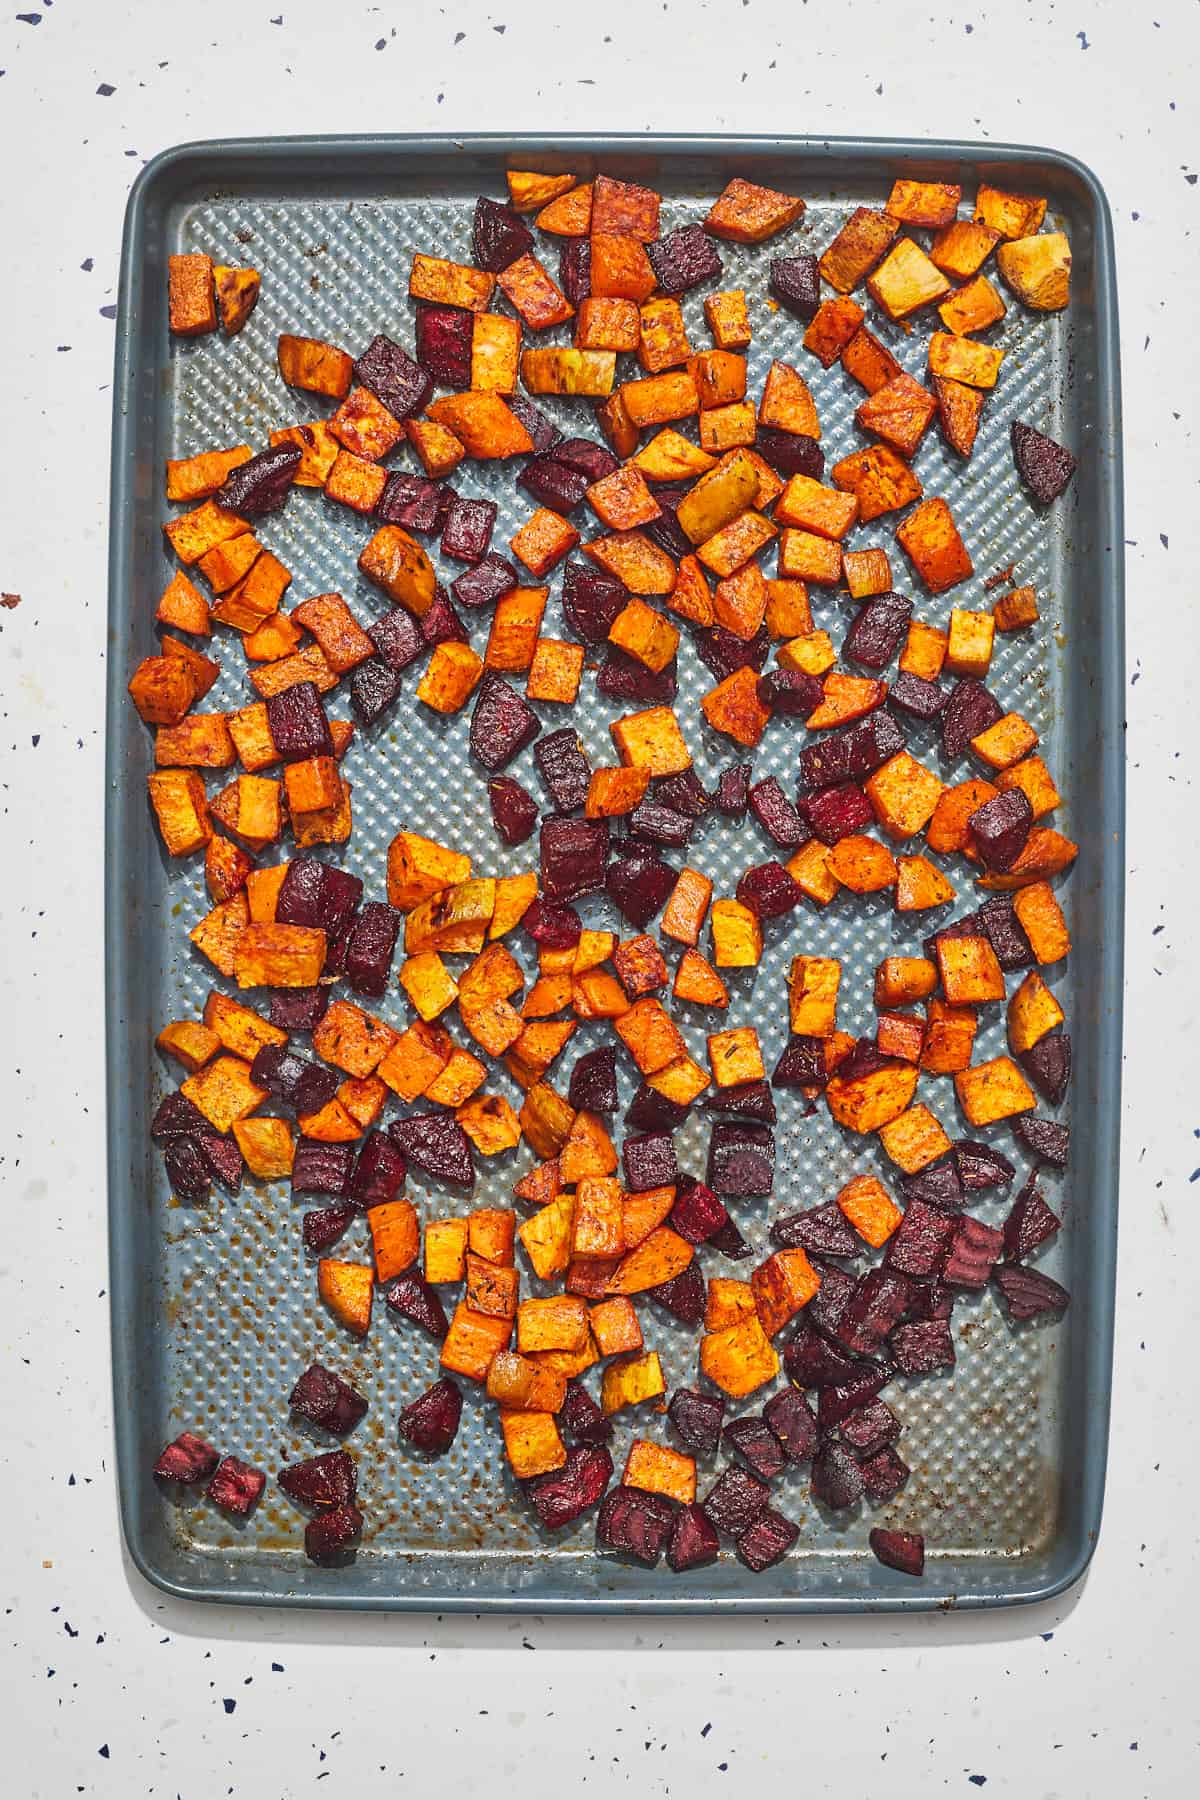 tray of roasted sweet potatoes and beets